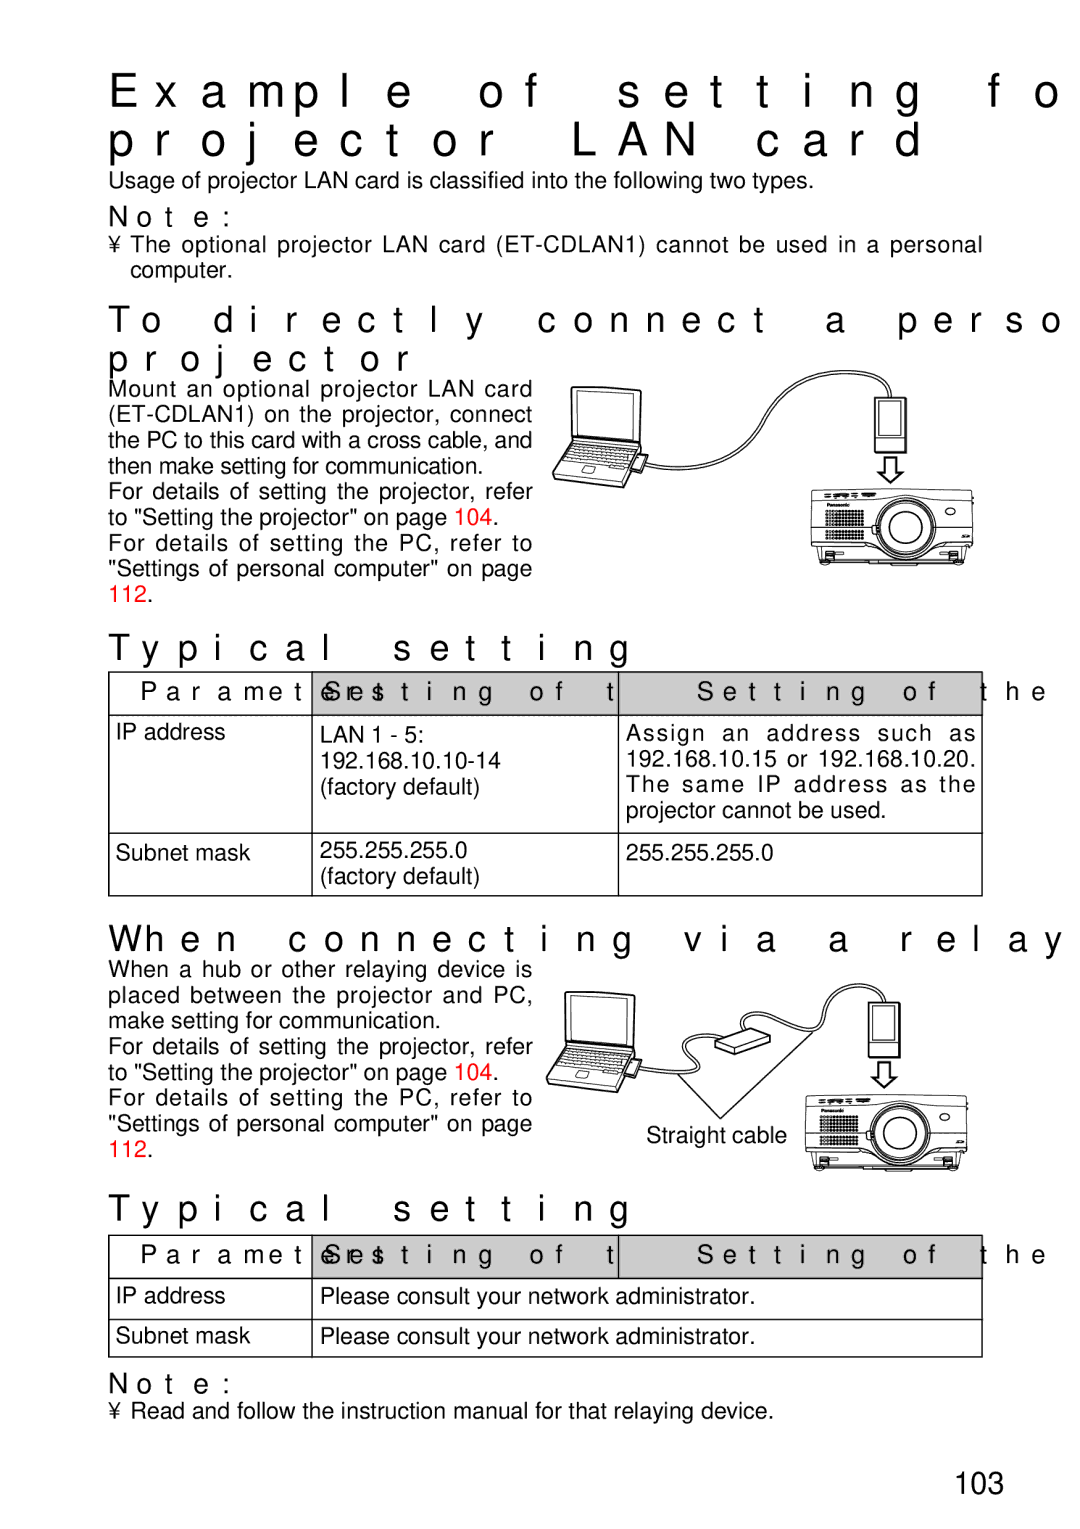 Panasonic PT-L750U R manual Example of setting for use of the projector LAN card, When connecting via a relaying device 